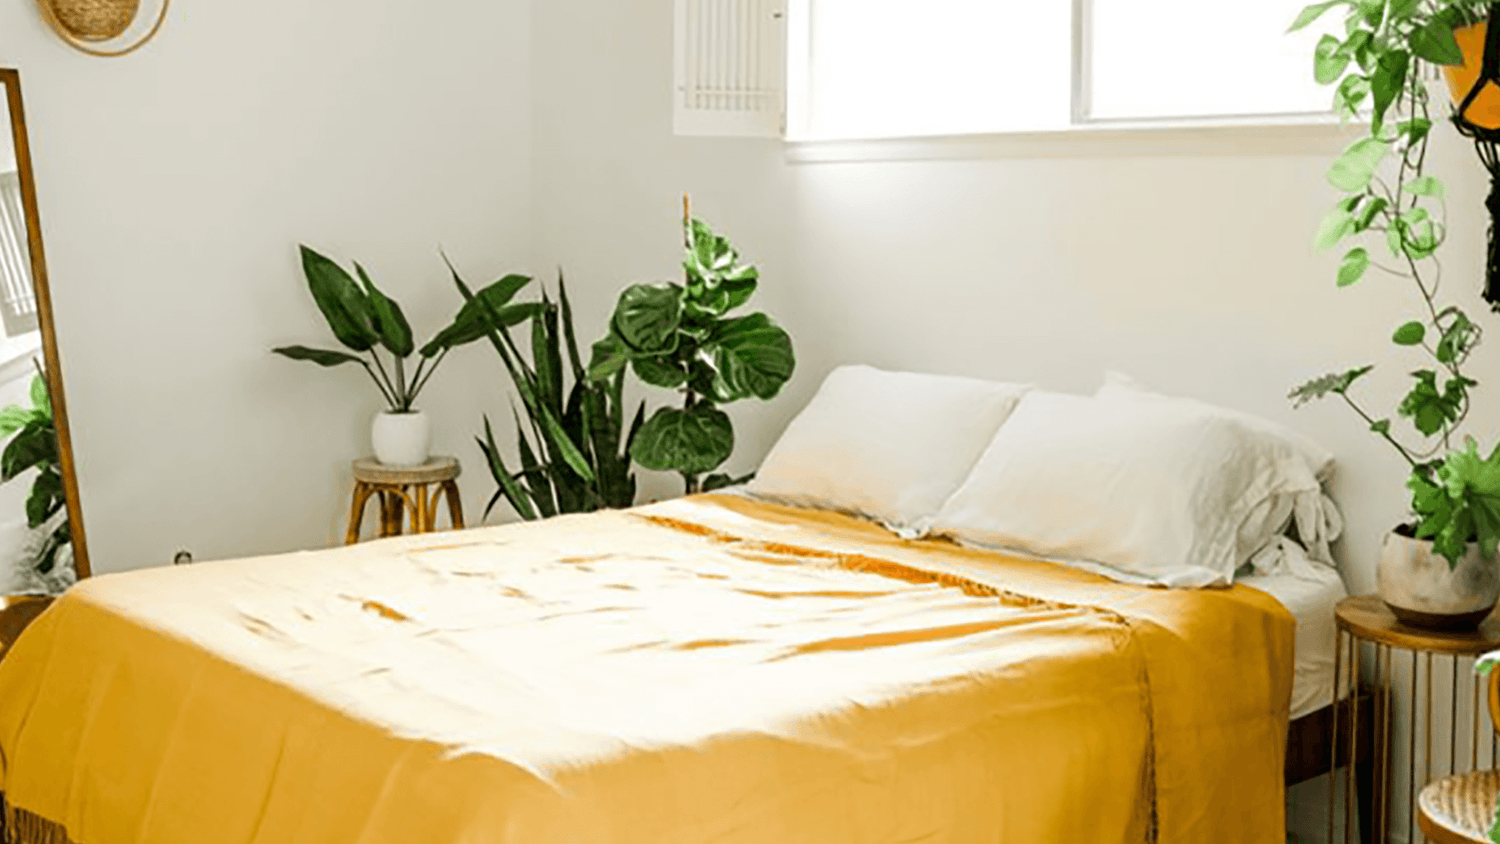 Yellow linen bedding in room with plants Jungle Pillows Homepage Banner